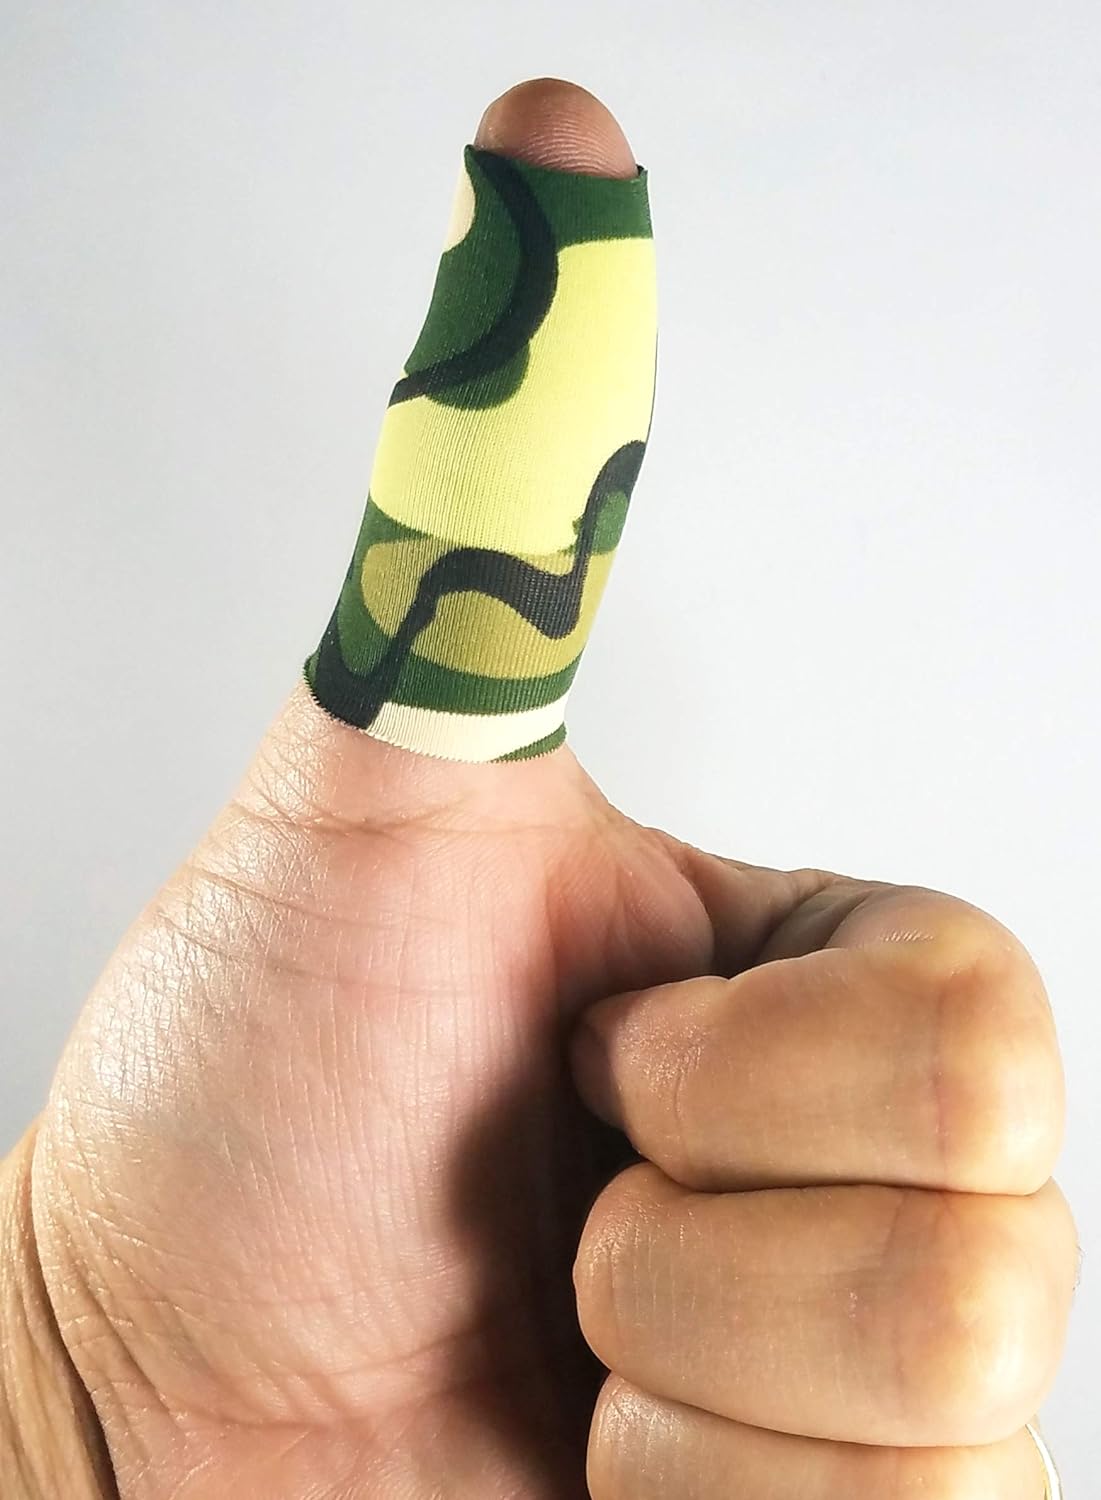 Bowling Thumb Sock – from The Makers of The Original Thumb Sock